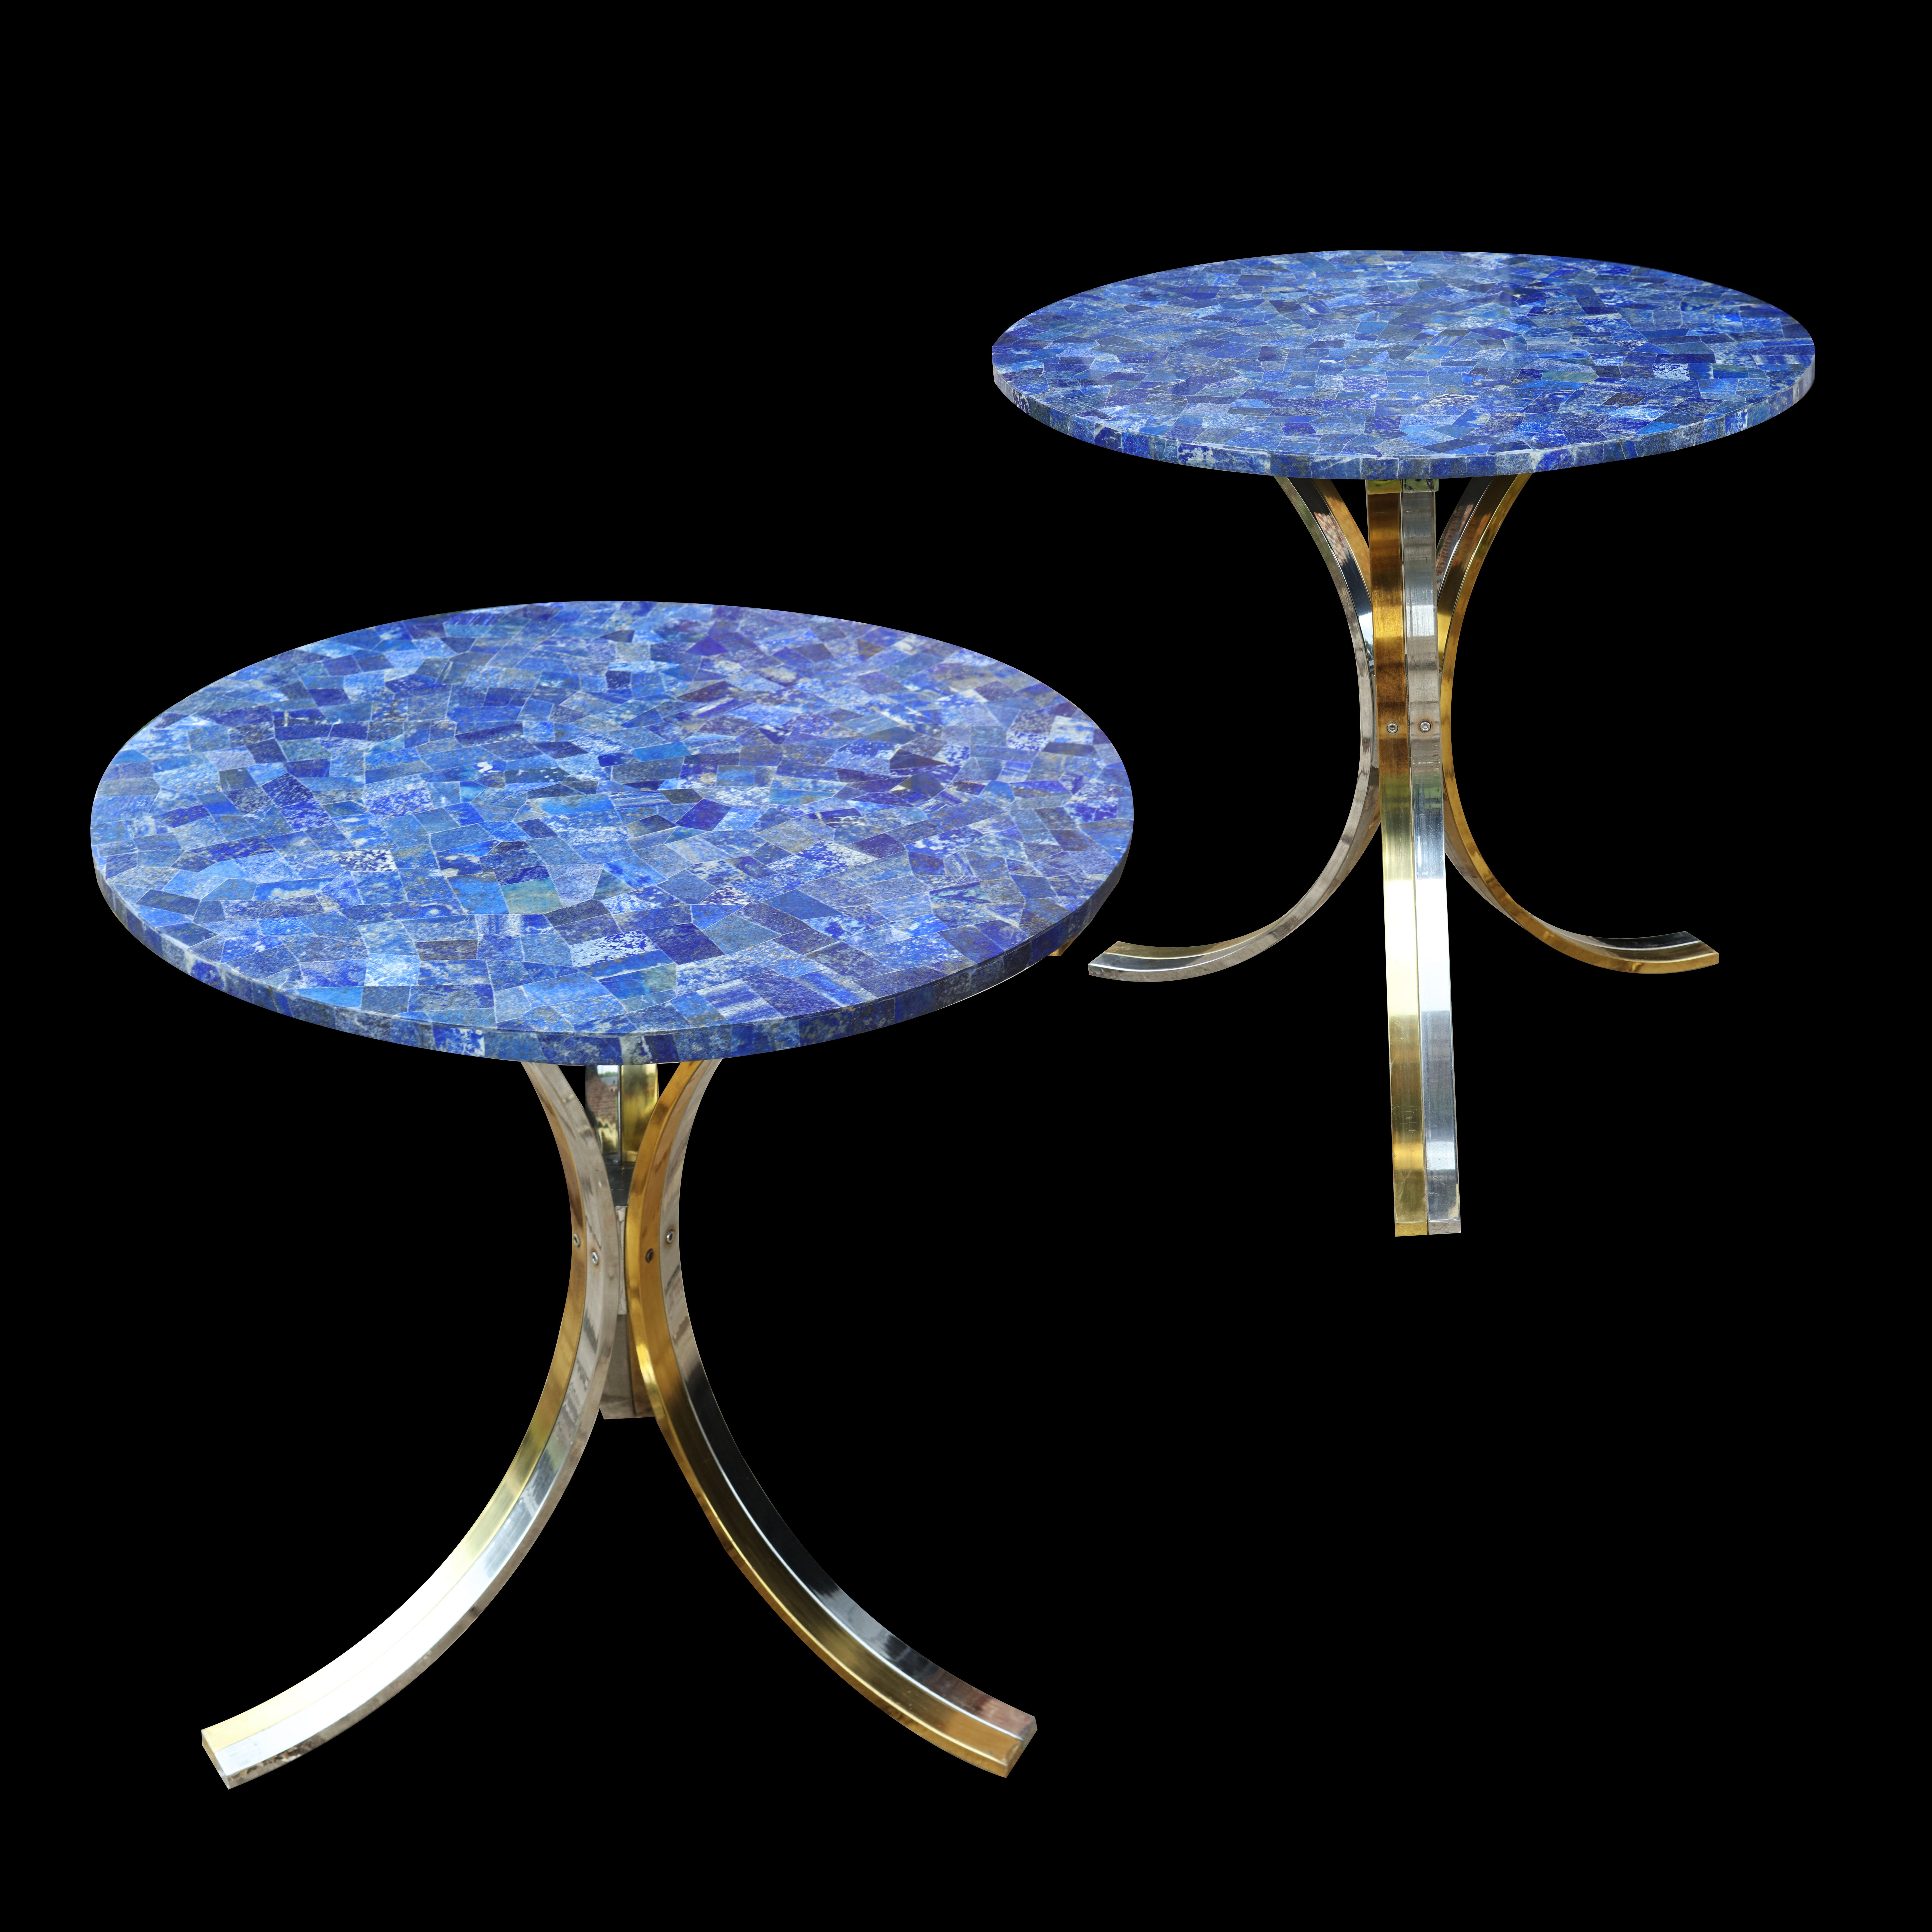 Midcentury Polished Chrome and Brass End Tables Attributed to Willy Rizzo, Pair In Good Condition In London, by appointment only